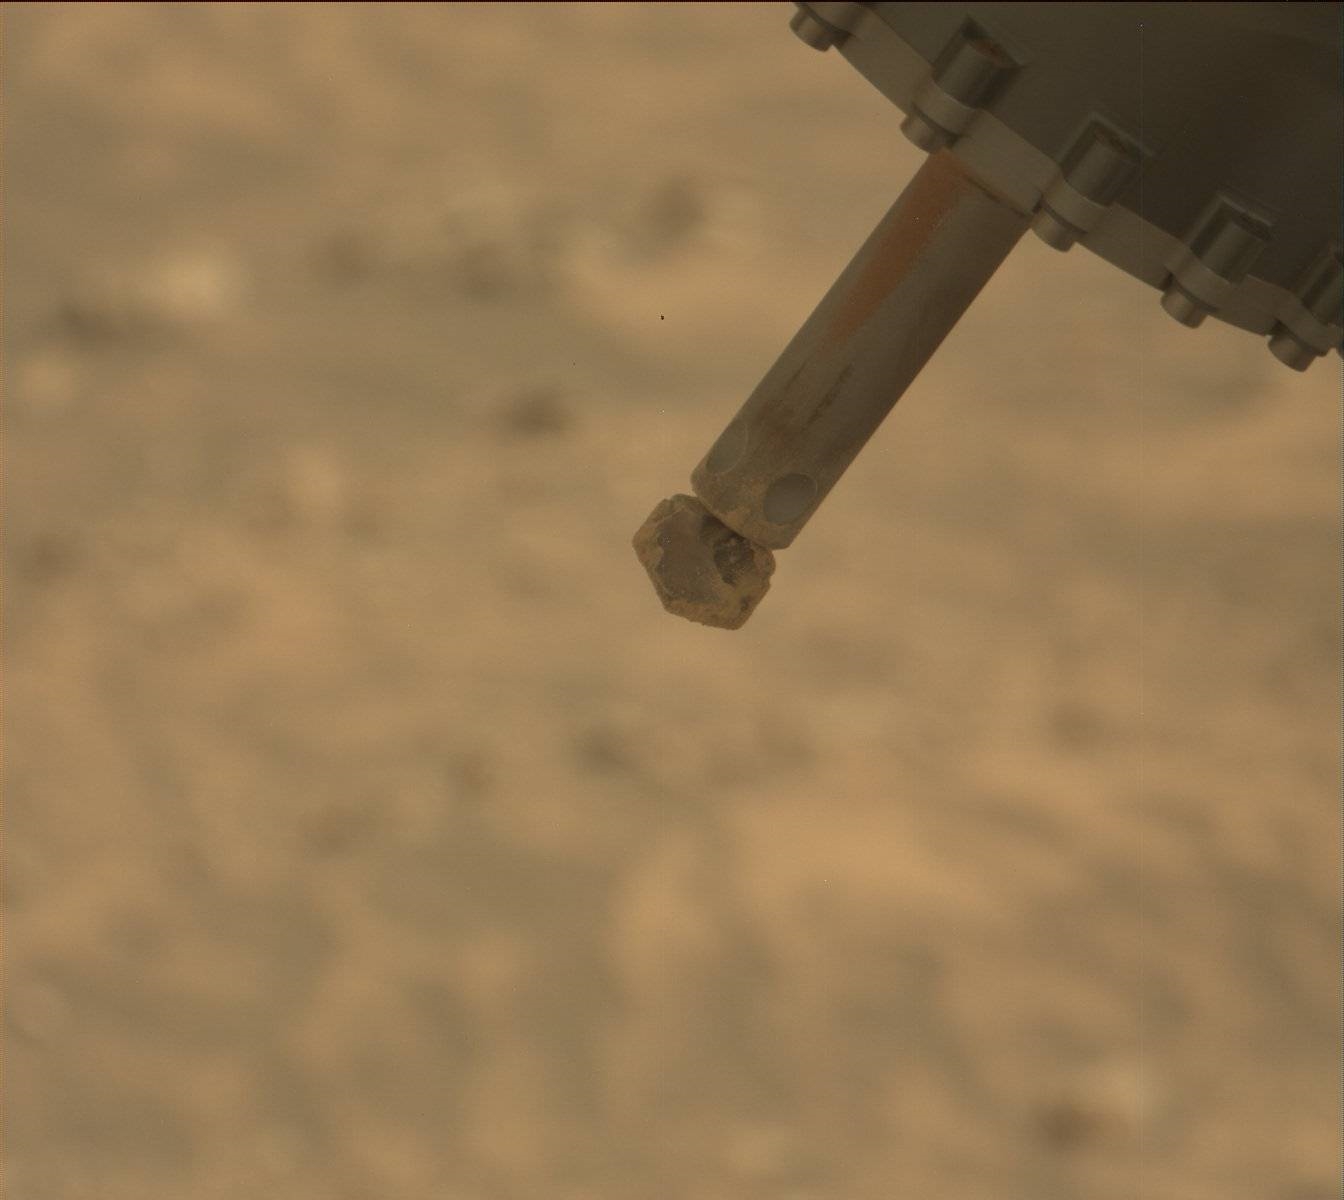 Against a blurry orange-bown backdrop of the Martian surface, an instrument pokes into the frame from upper right. What looks like a gray metal base fills the upper right corner, and extending from that is a spindle, with what looks like a grinding drill bit at its end, terminating at the center of the image.